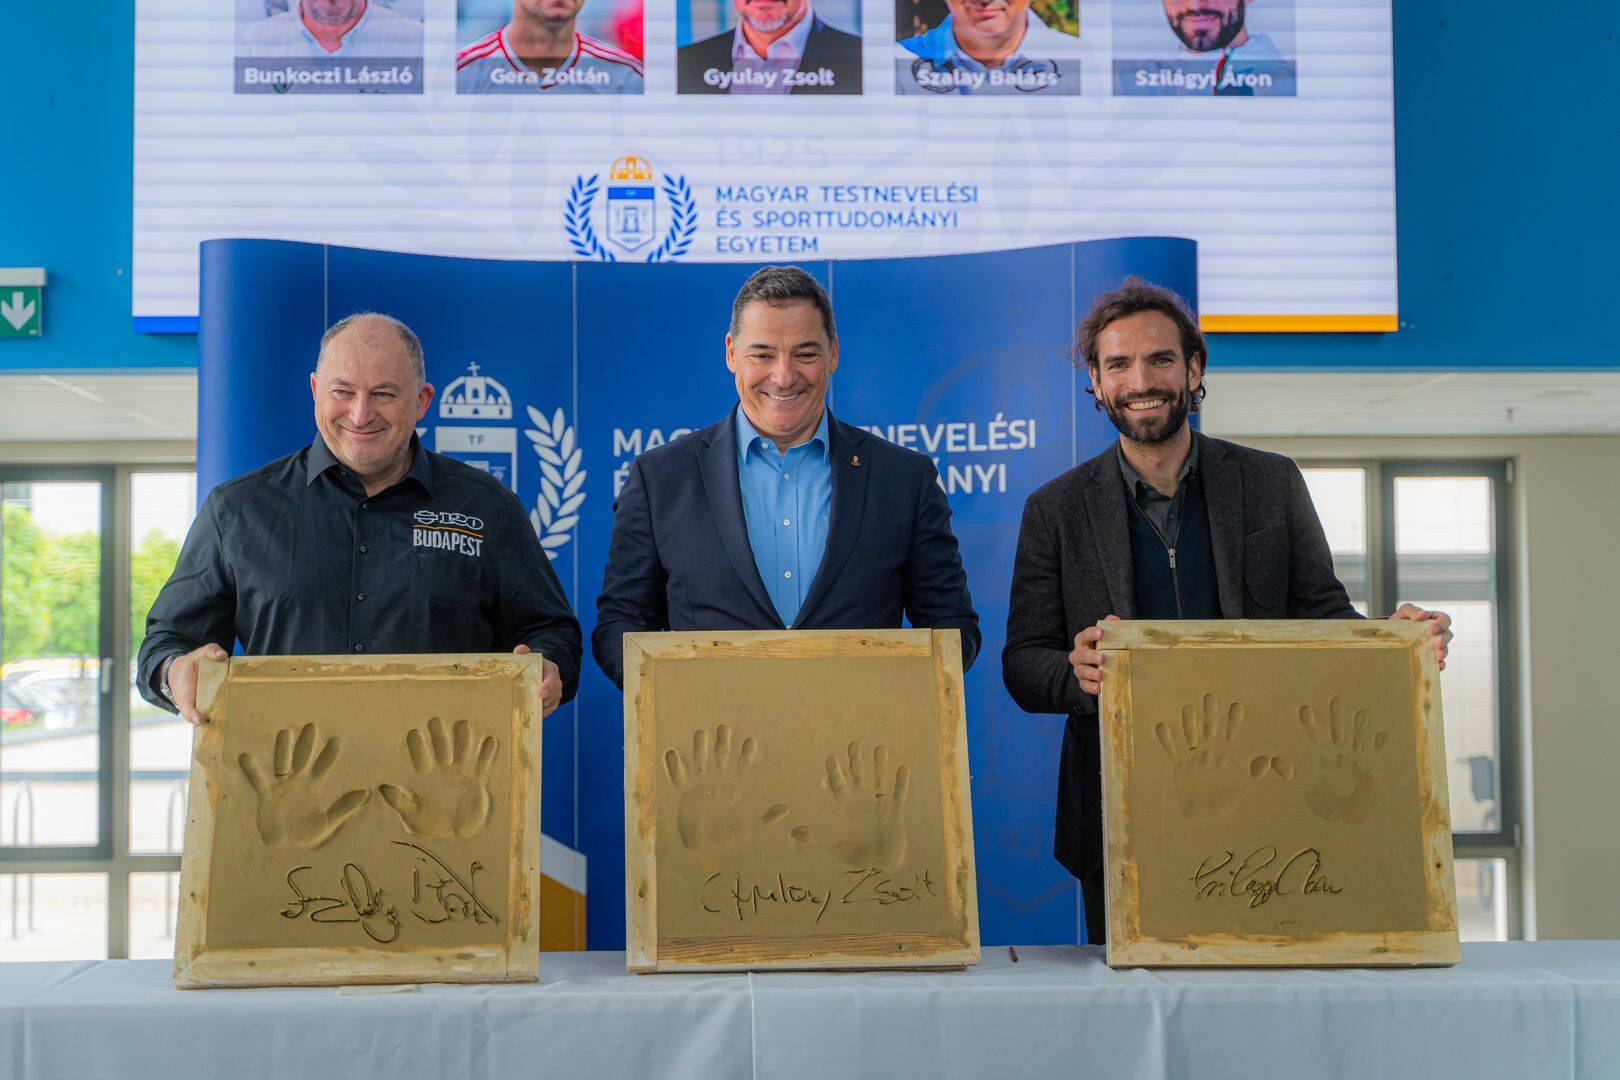 New handprints to be added to the Wall of Hungarian Sports Stars